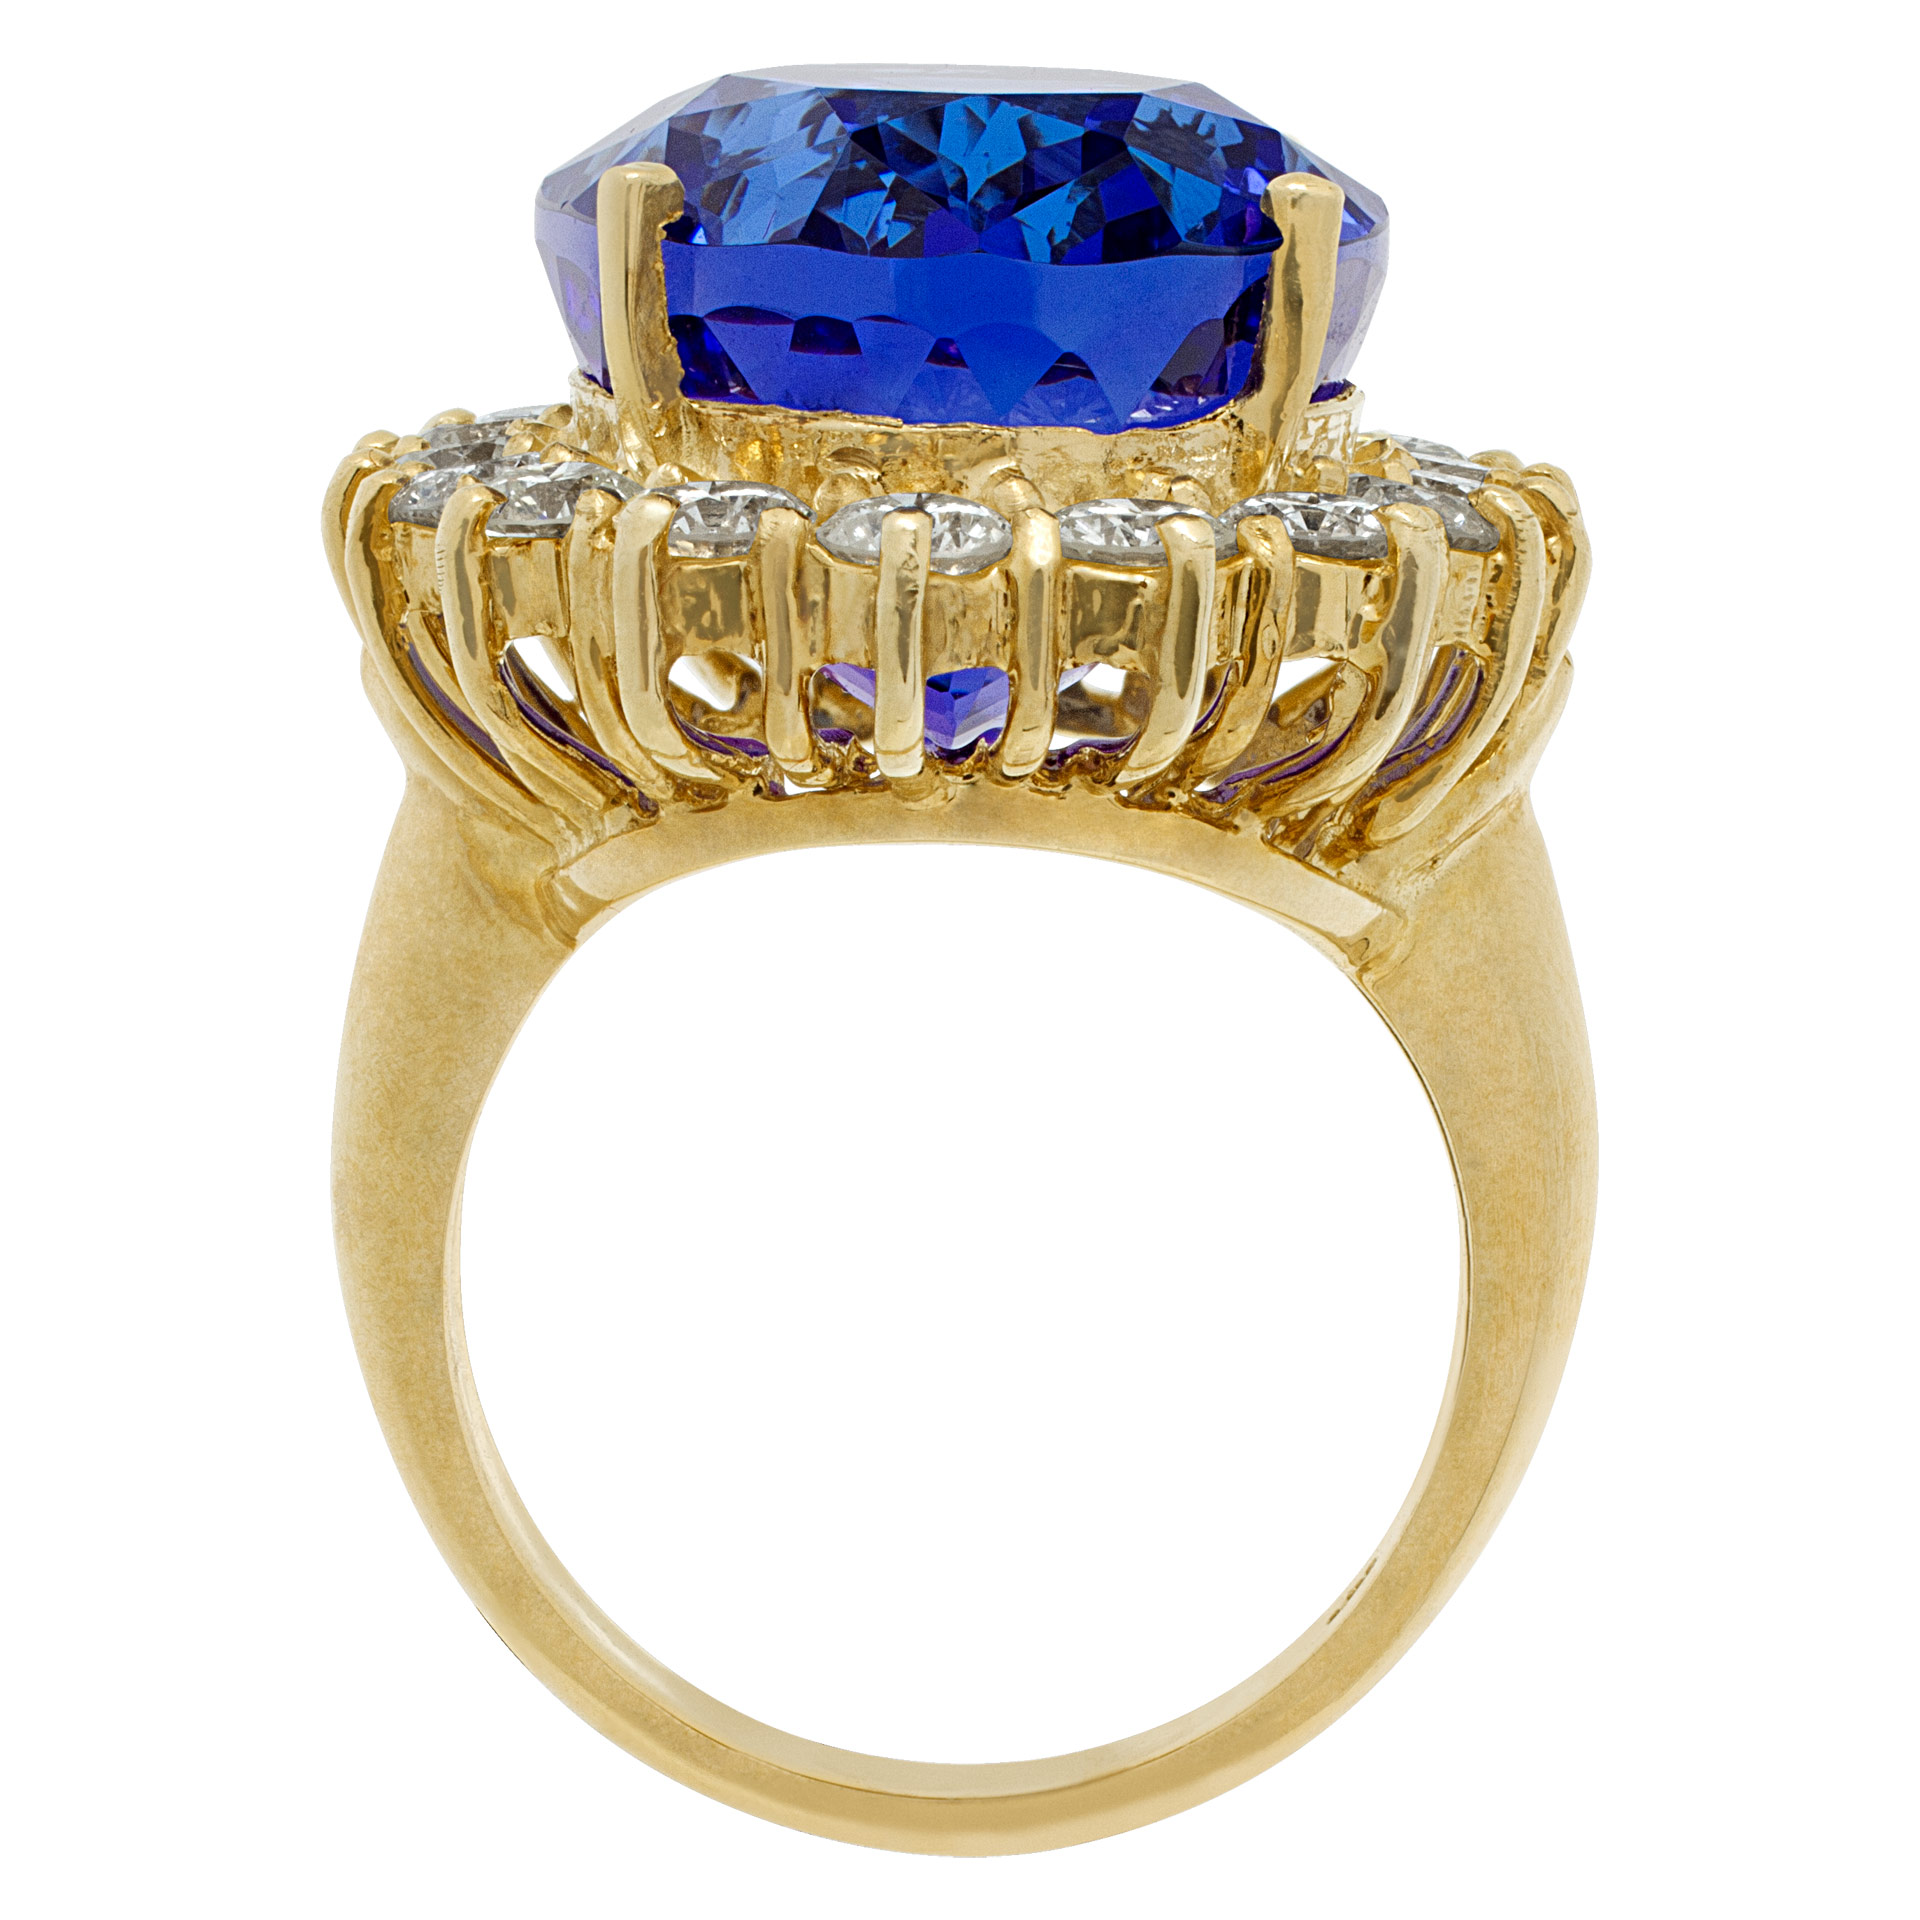 Tanzanite and diamond ring in 14k gold with approx. 25 carats tanzanite image 4